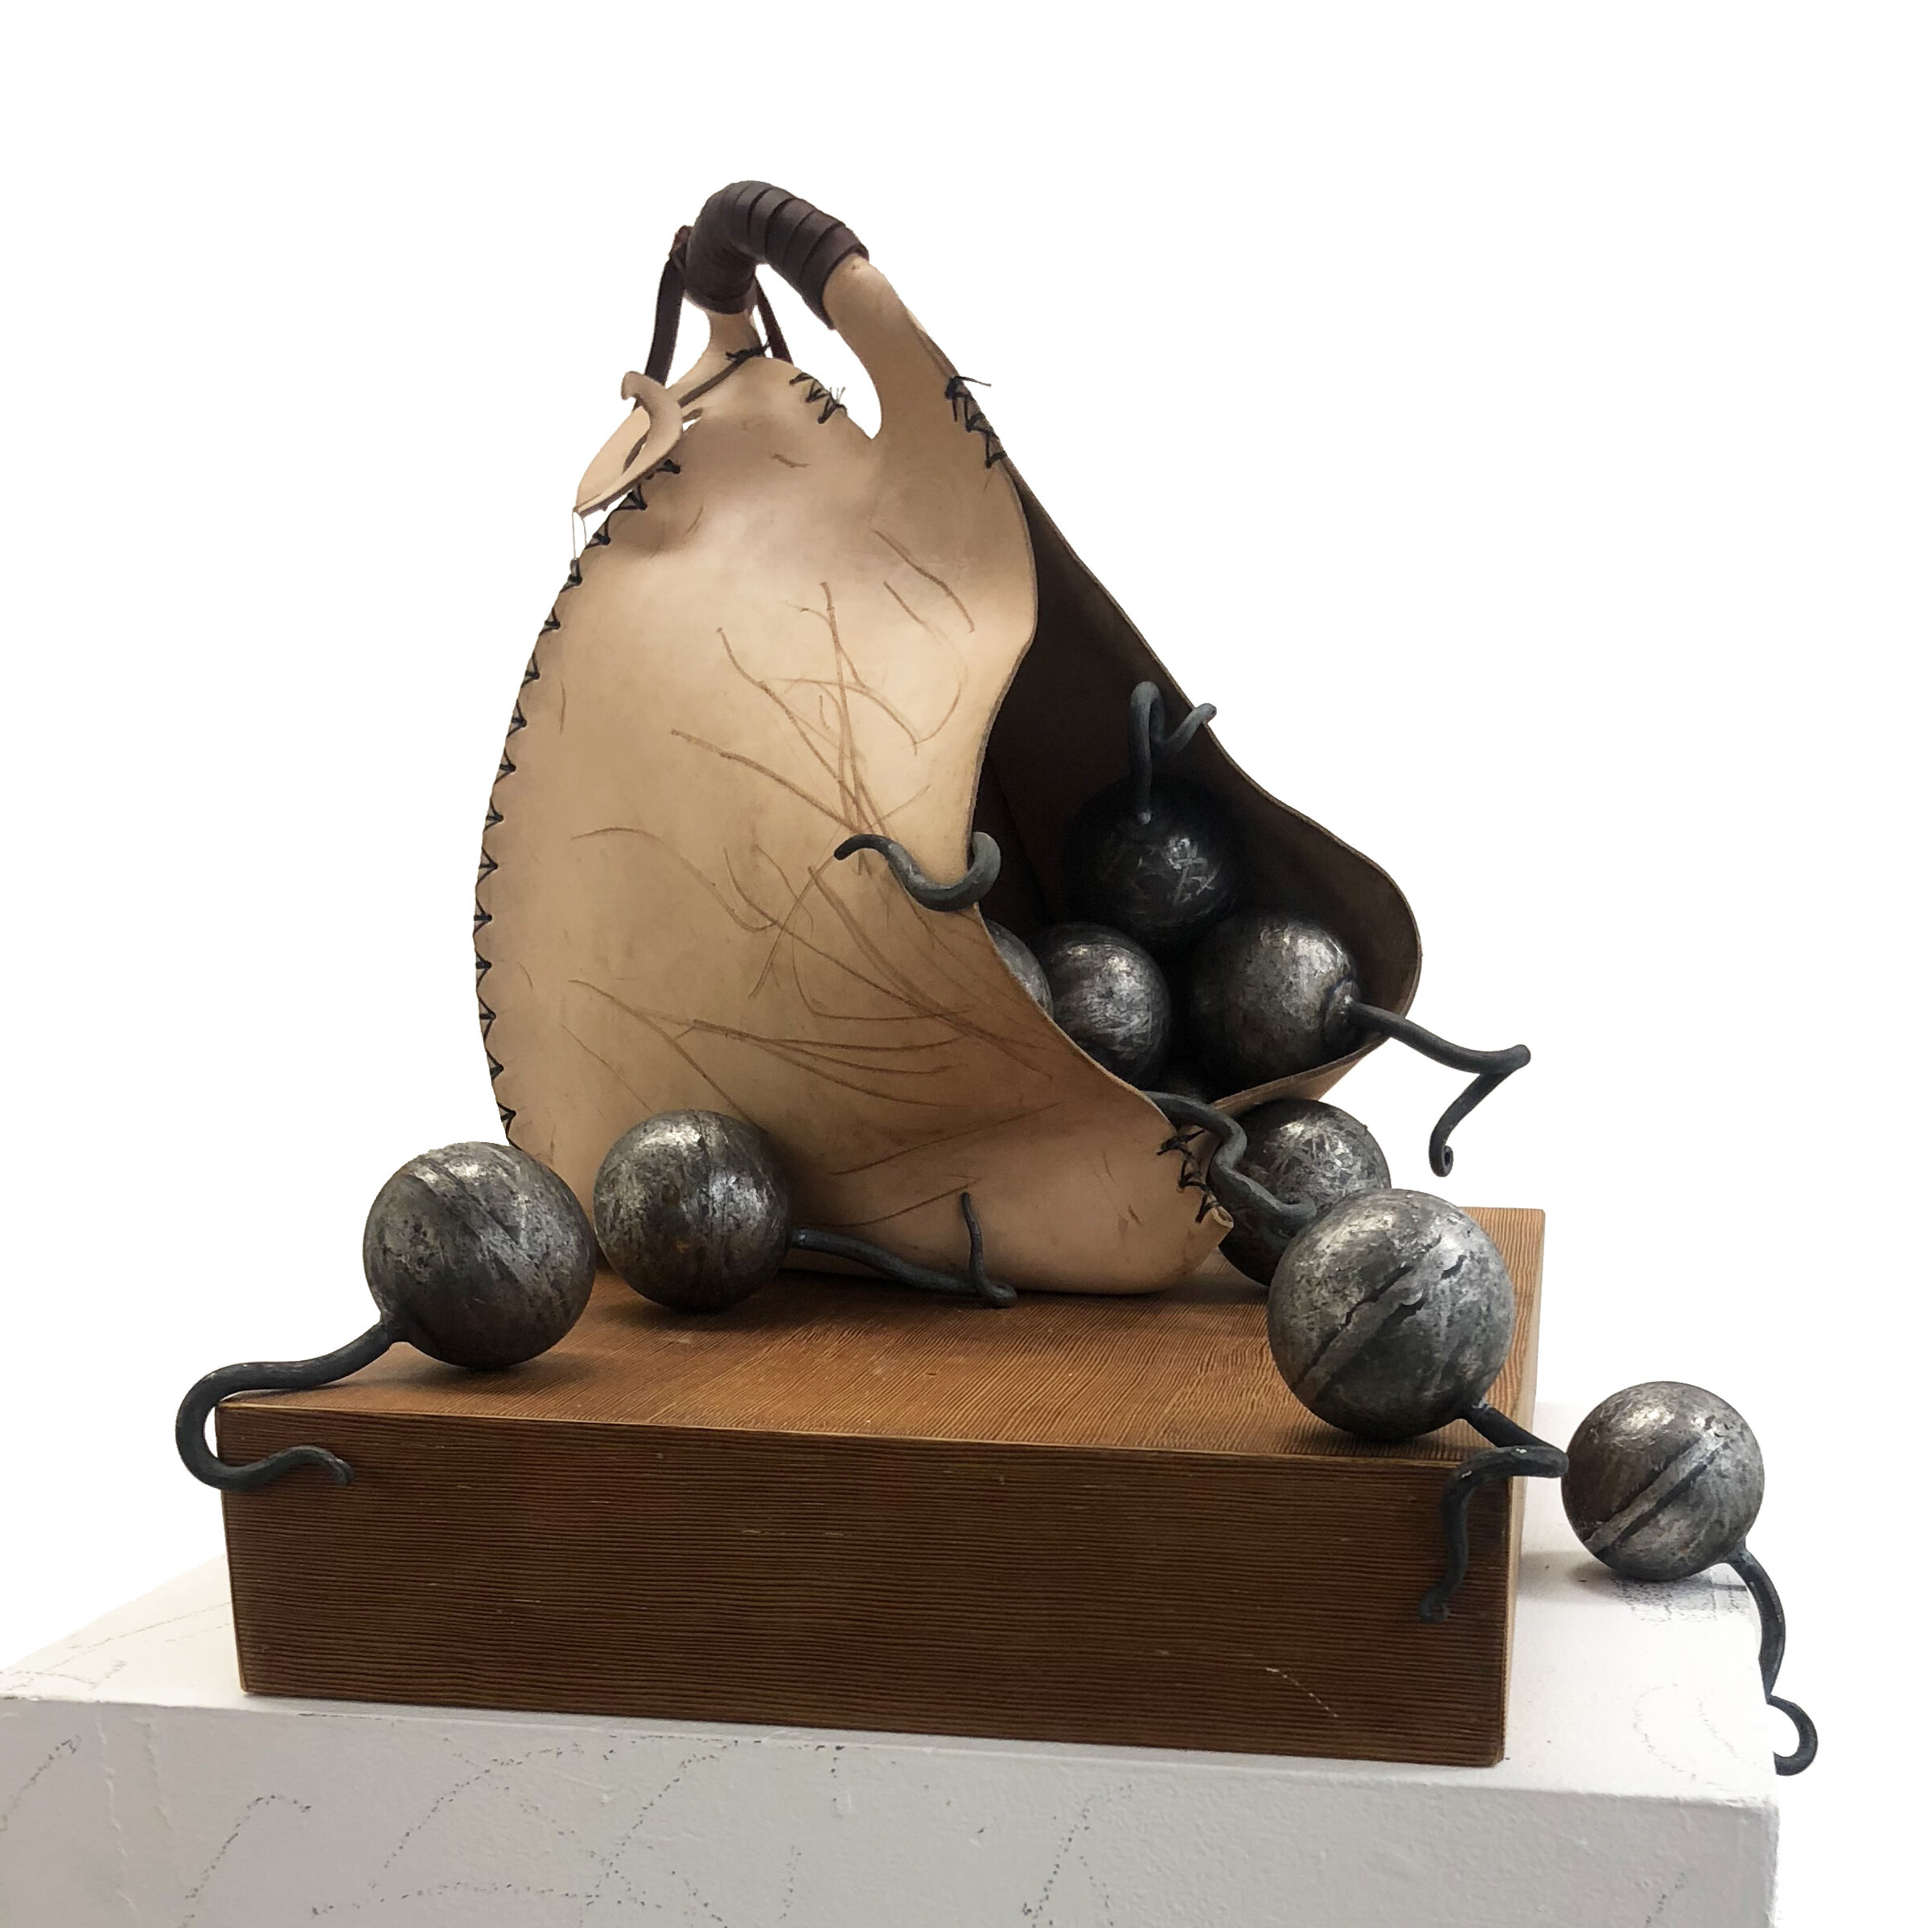 Scout Handford, "Present, Past, Future, Silent, Clairvoyant," 2019. Leather, wood, metal, glass, 12" x 18" x 10".